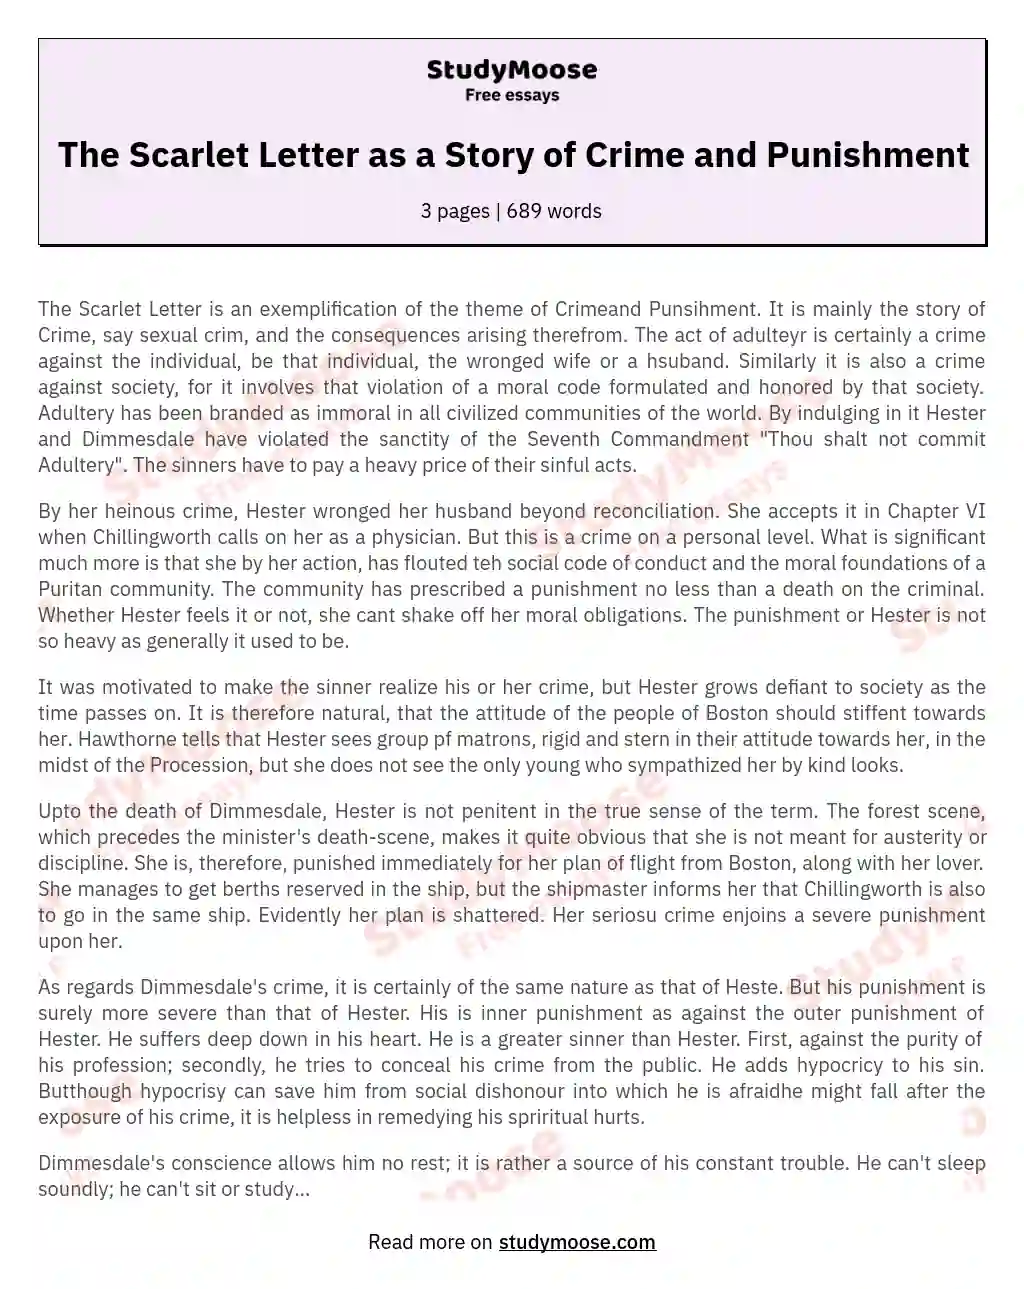 The Scarlet Letter as a Story of Crime and Punishment